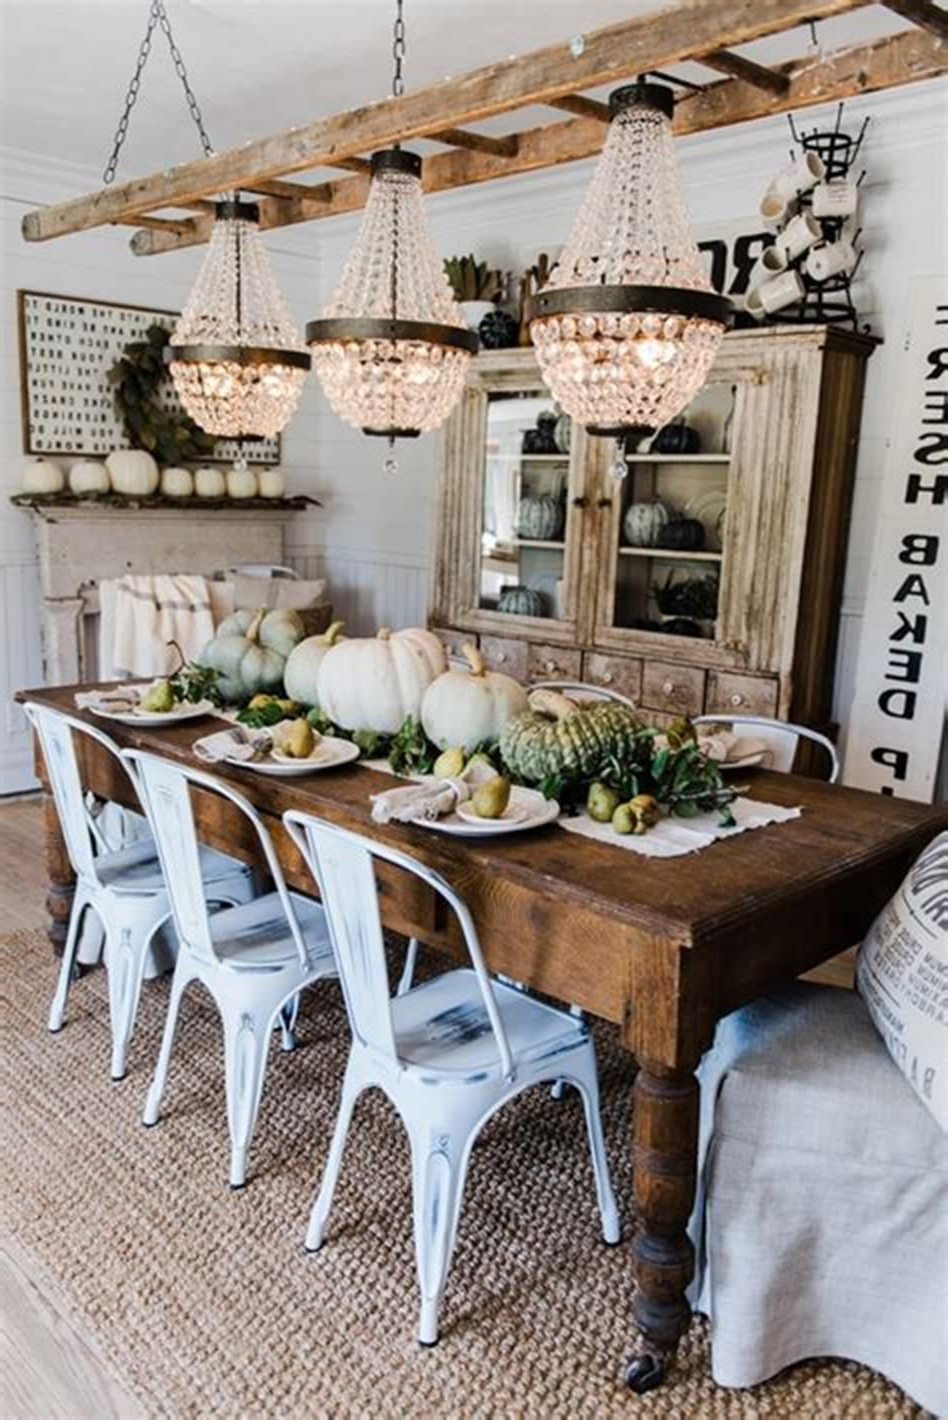 34 Amazing Vintage Rustic Fall Decorating Ideas For This